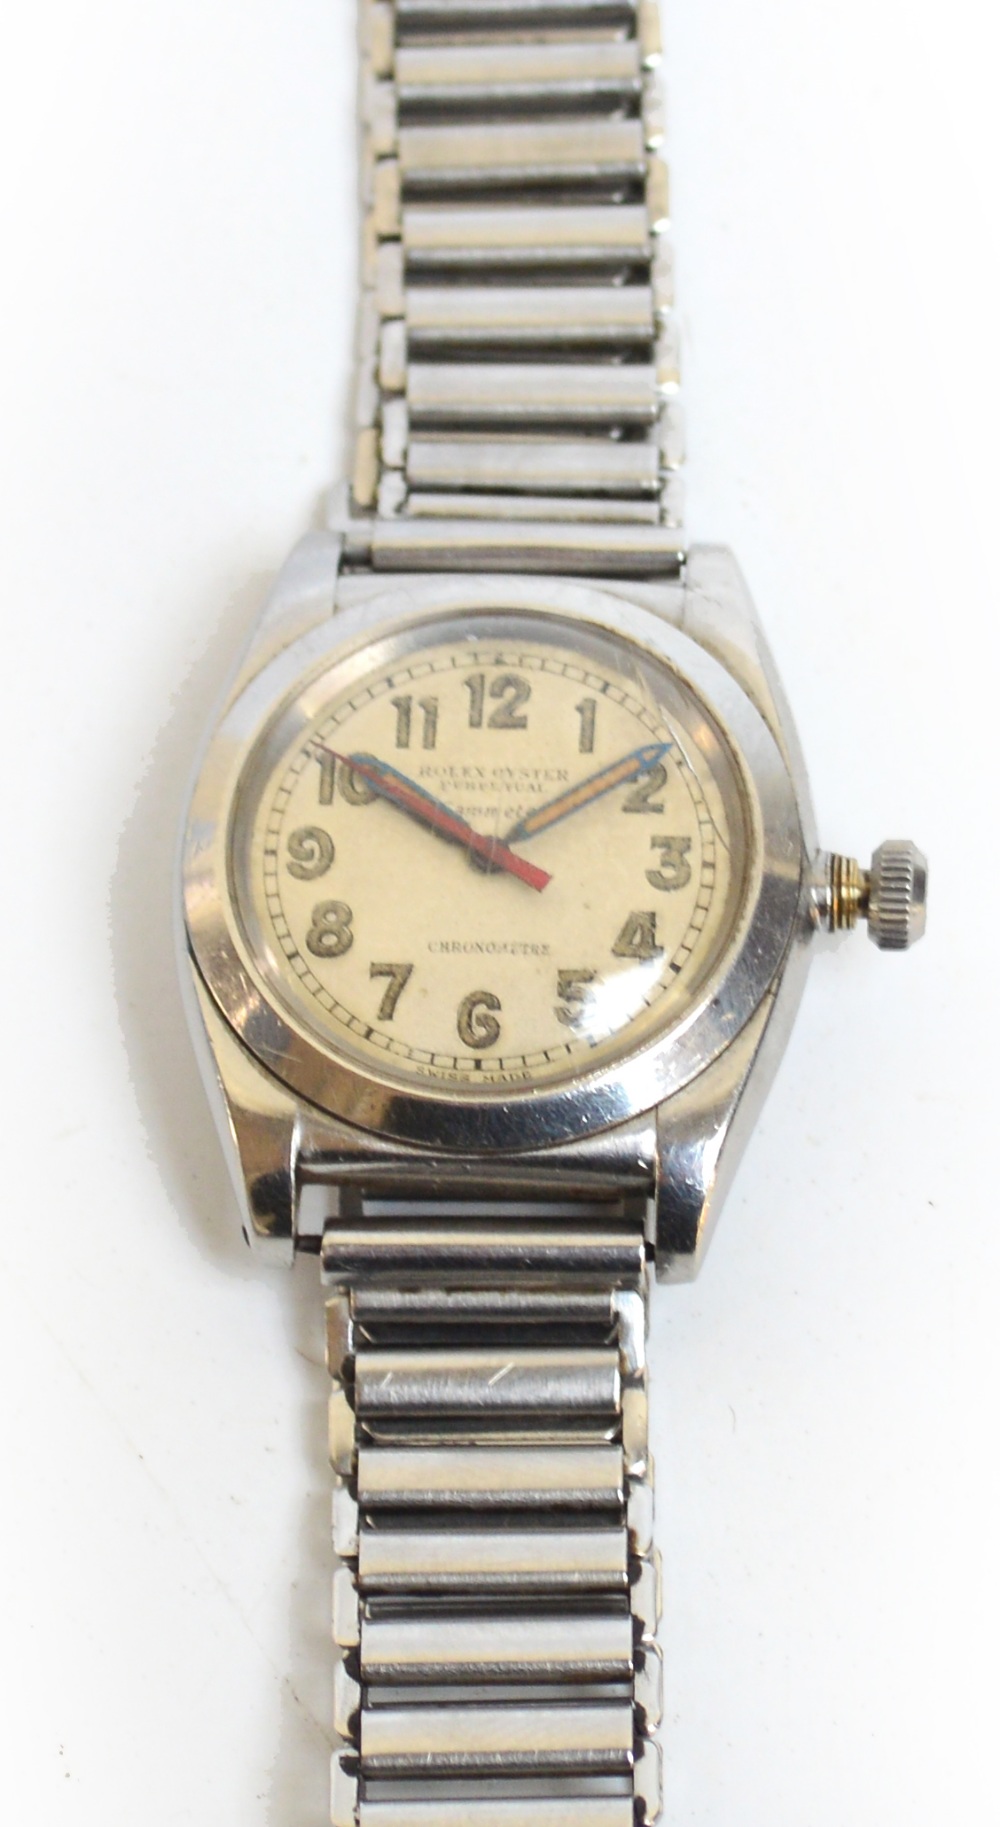 ROLEX; a 1940s oyster perpetual "chronometer" stainless steel mechanical gentleman's wristwatch, the